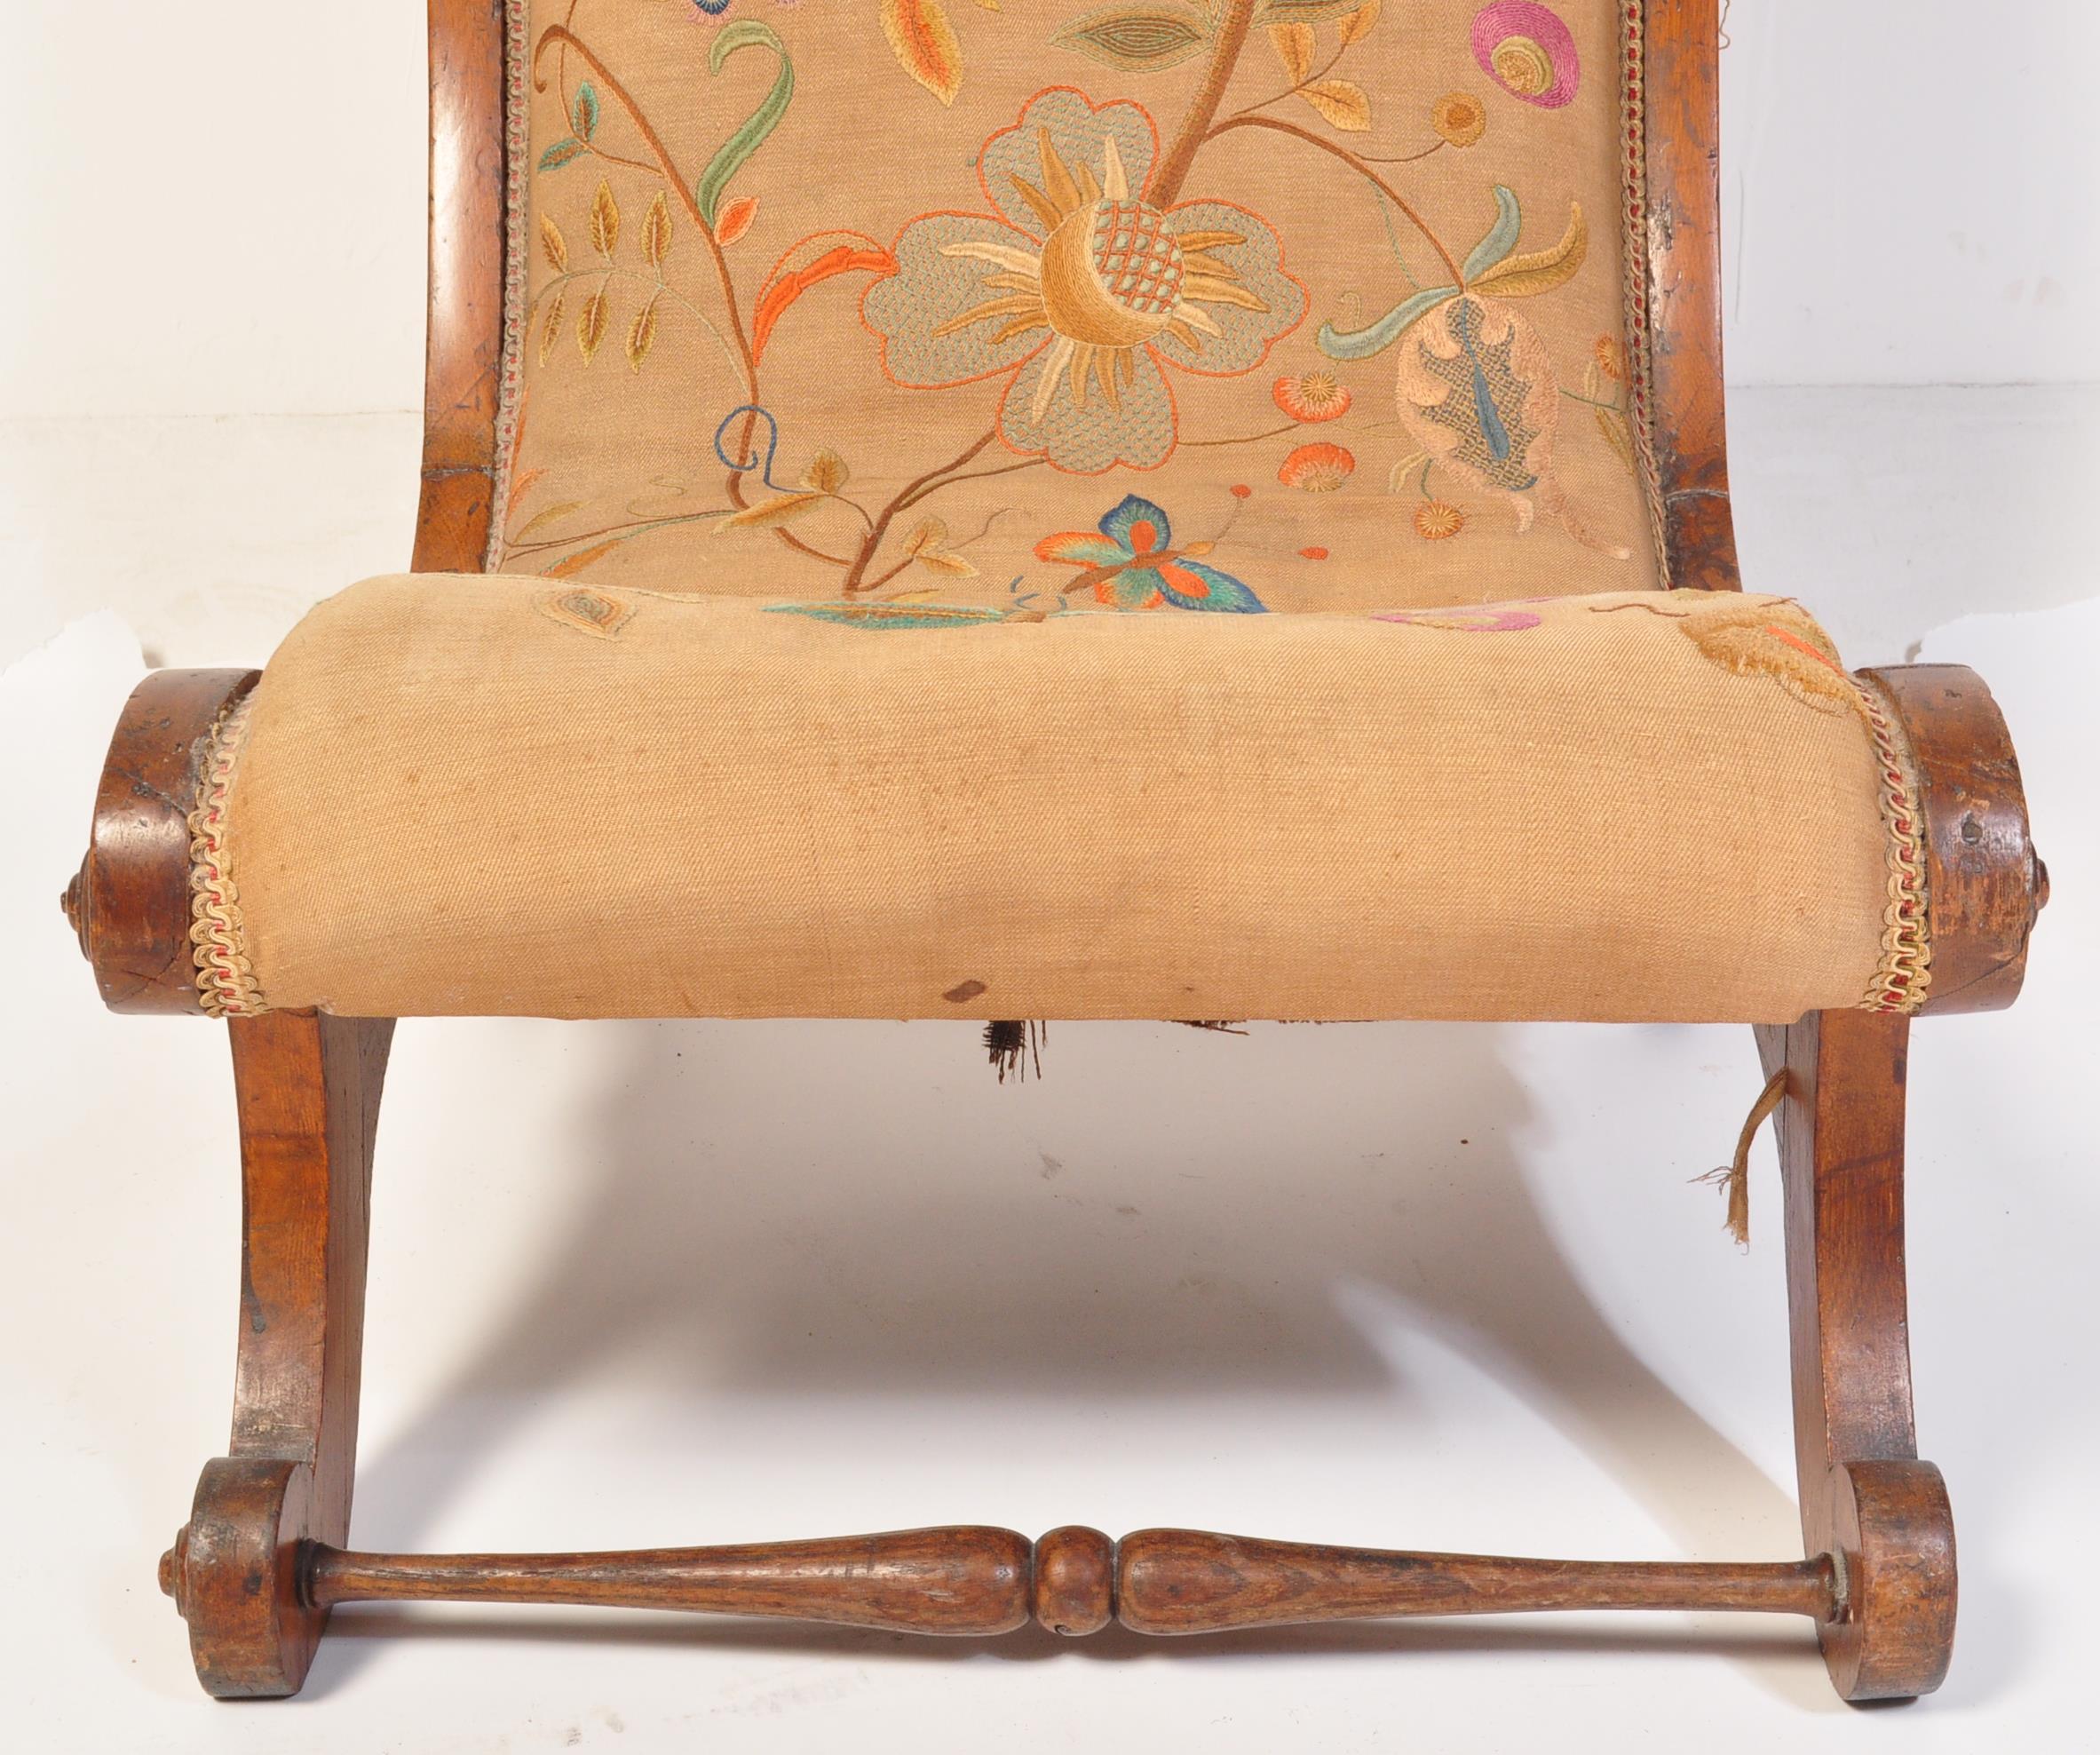 19TH CENTURY VICTORIAN AESTHETIC PERIOD NURSING CHAIR - Image 5 of 9